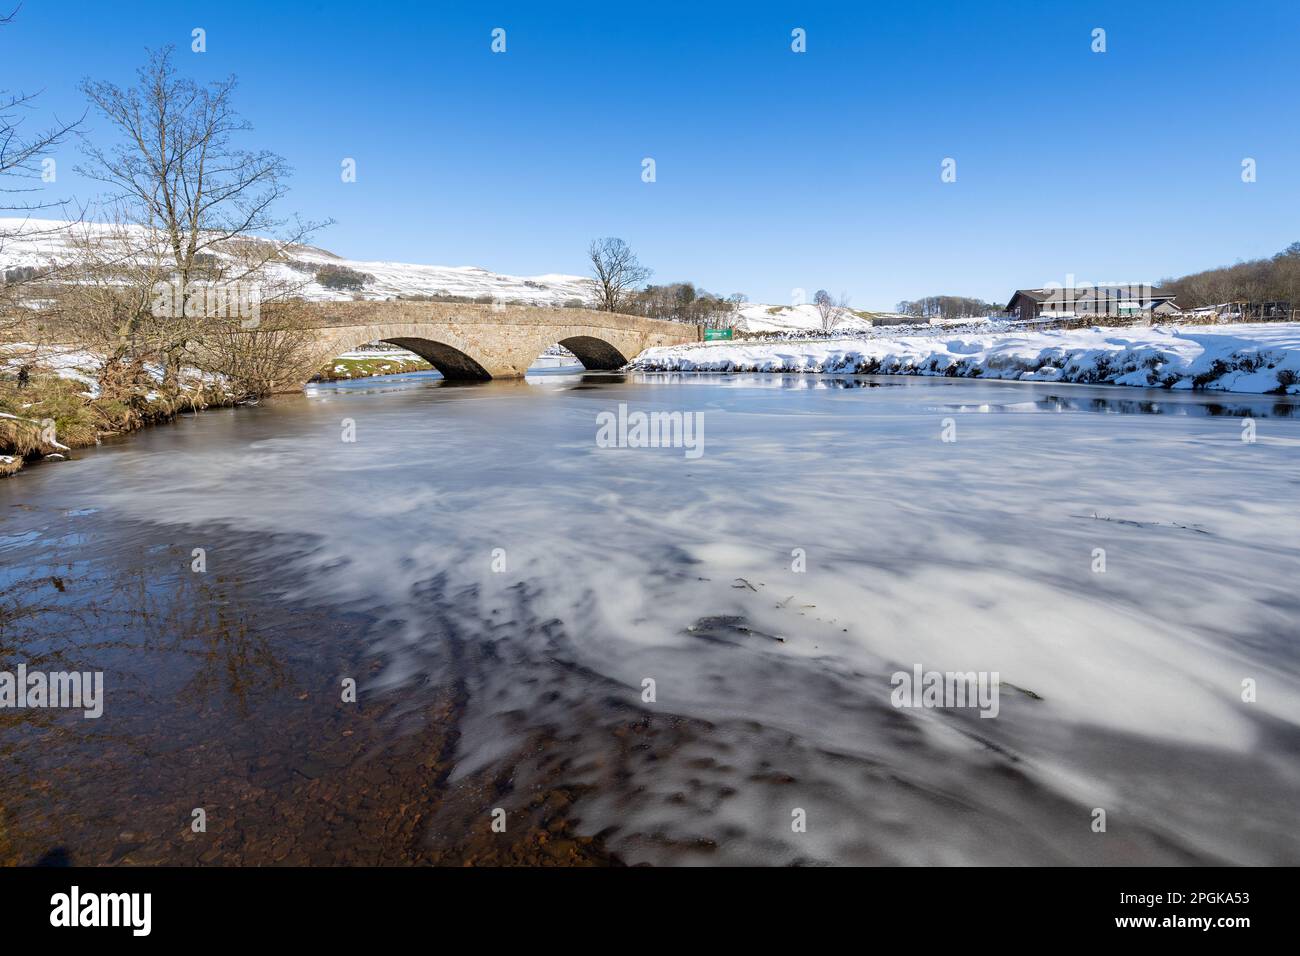 Haylands Bridge on the River Ure near Hawes, with the river part frozen in a cold winter spell. Yorkshire Dales National Park, UK. Stock Photo